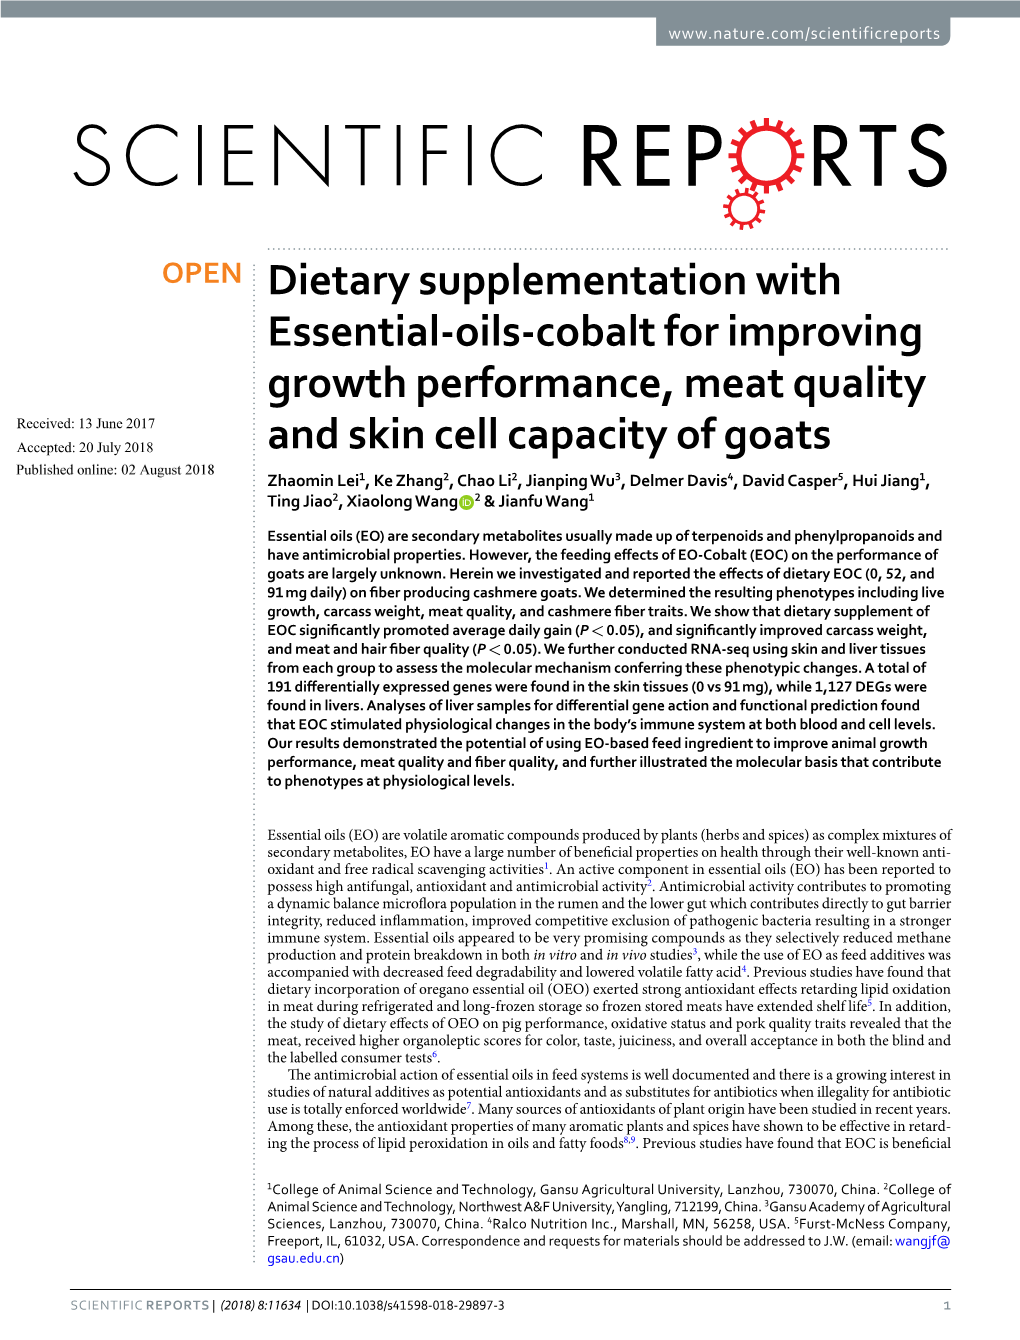 Dietary Supplementation with Essential-Oils-Cobalt for Improving